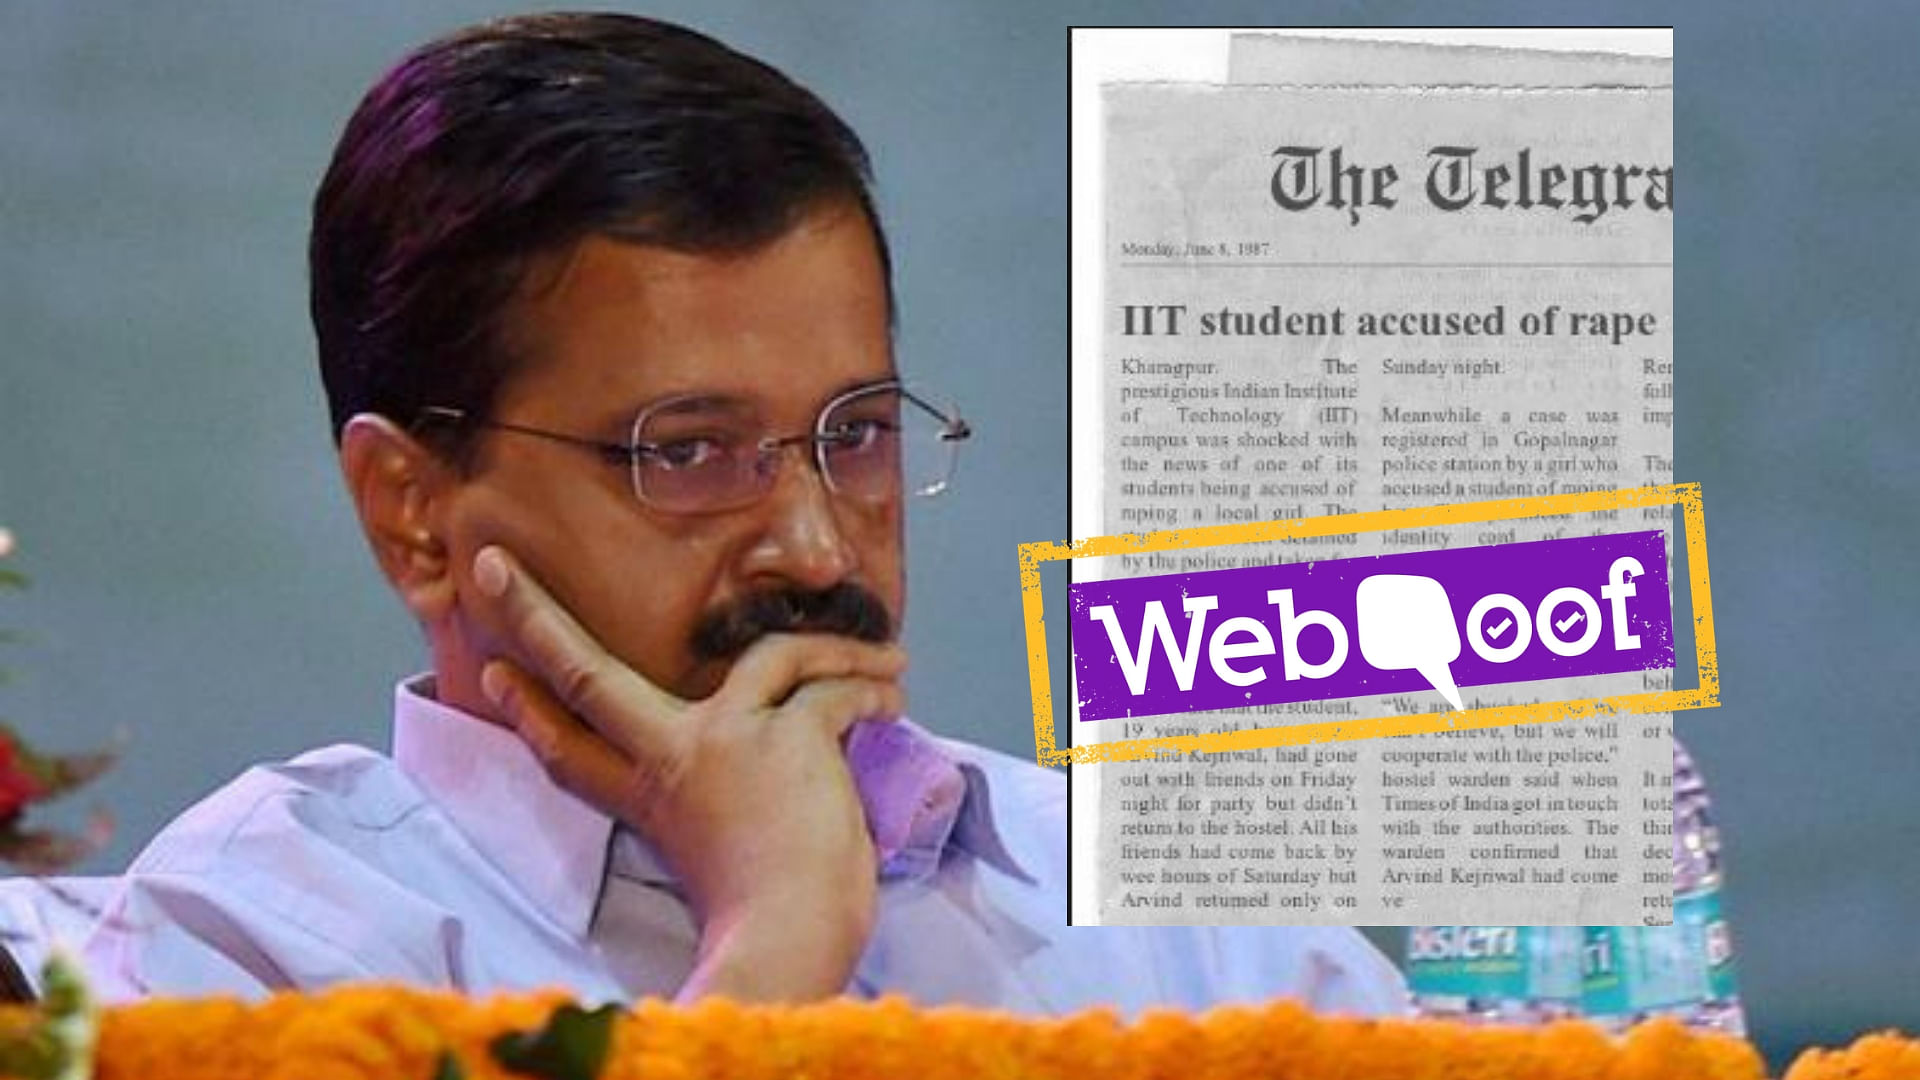 Clippings of a report claiming Arvind Kejriwal was accused of raping a woman in 1987 at IIT Kharagpur has gone viral.